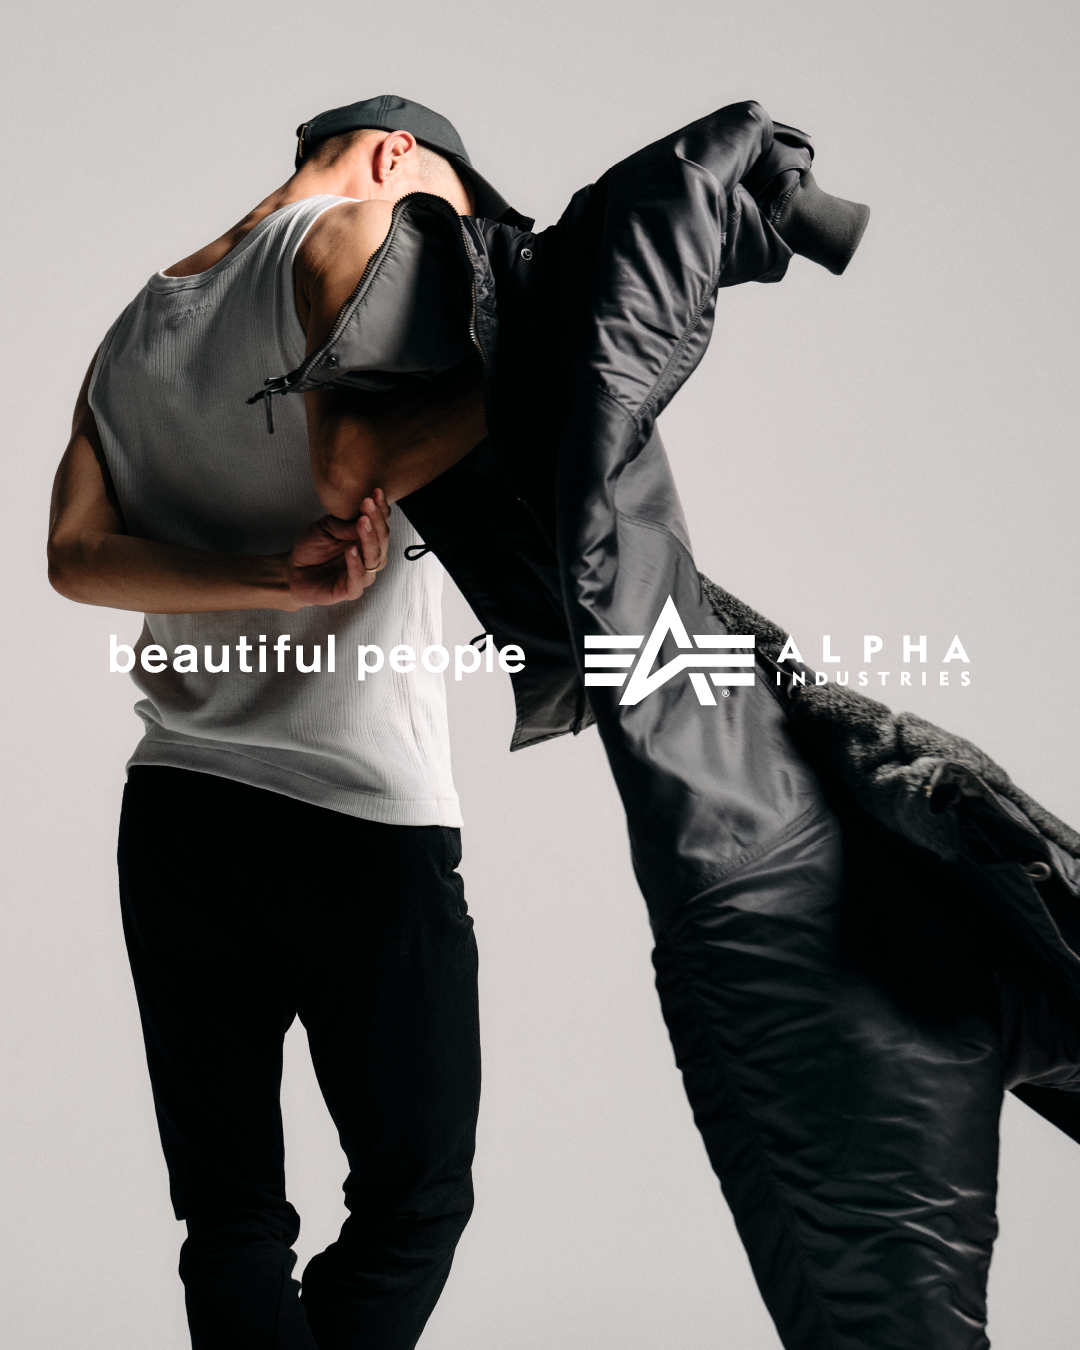 2022 ALPHA INDUSTRIES COLLABORATION | beautiful people